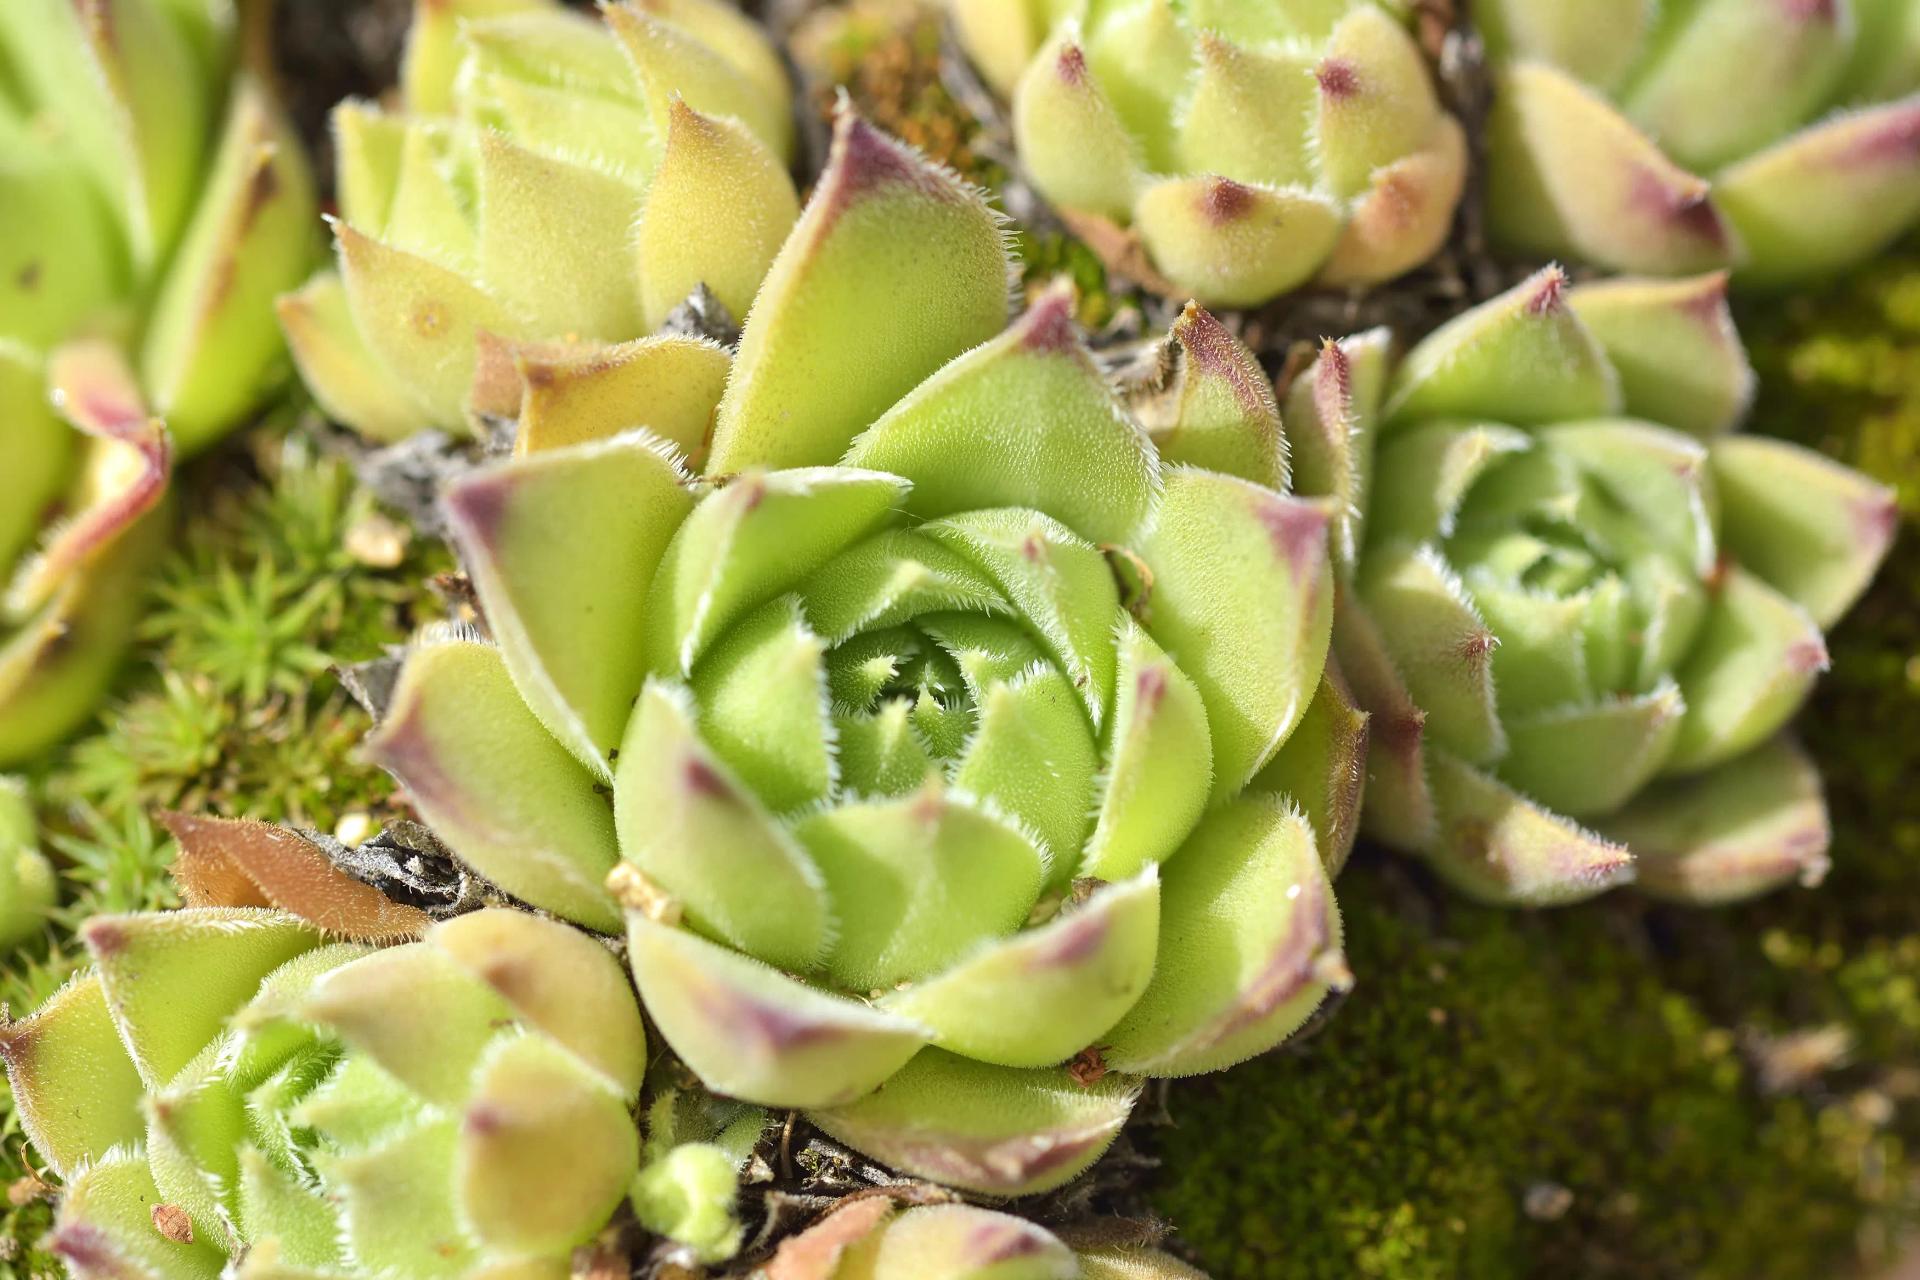 Echeveria agavoides with purple leaves edges